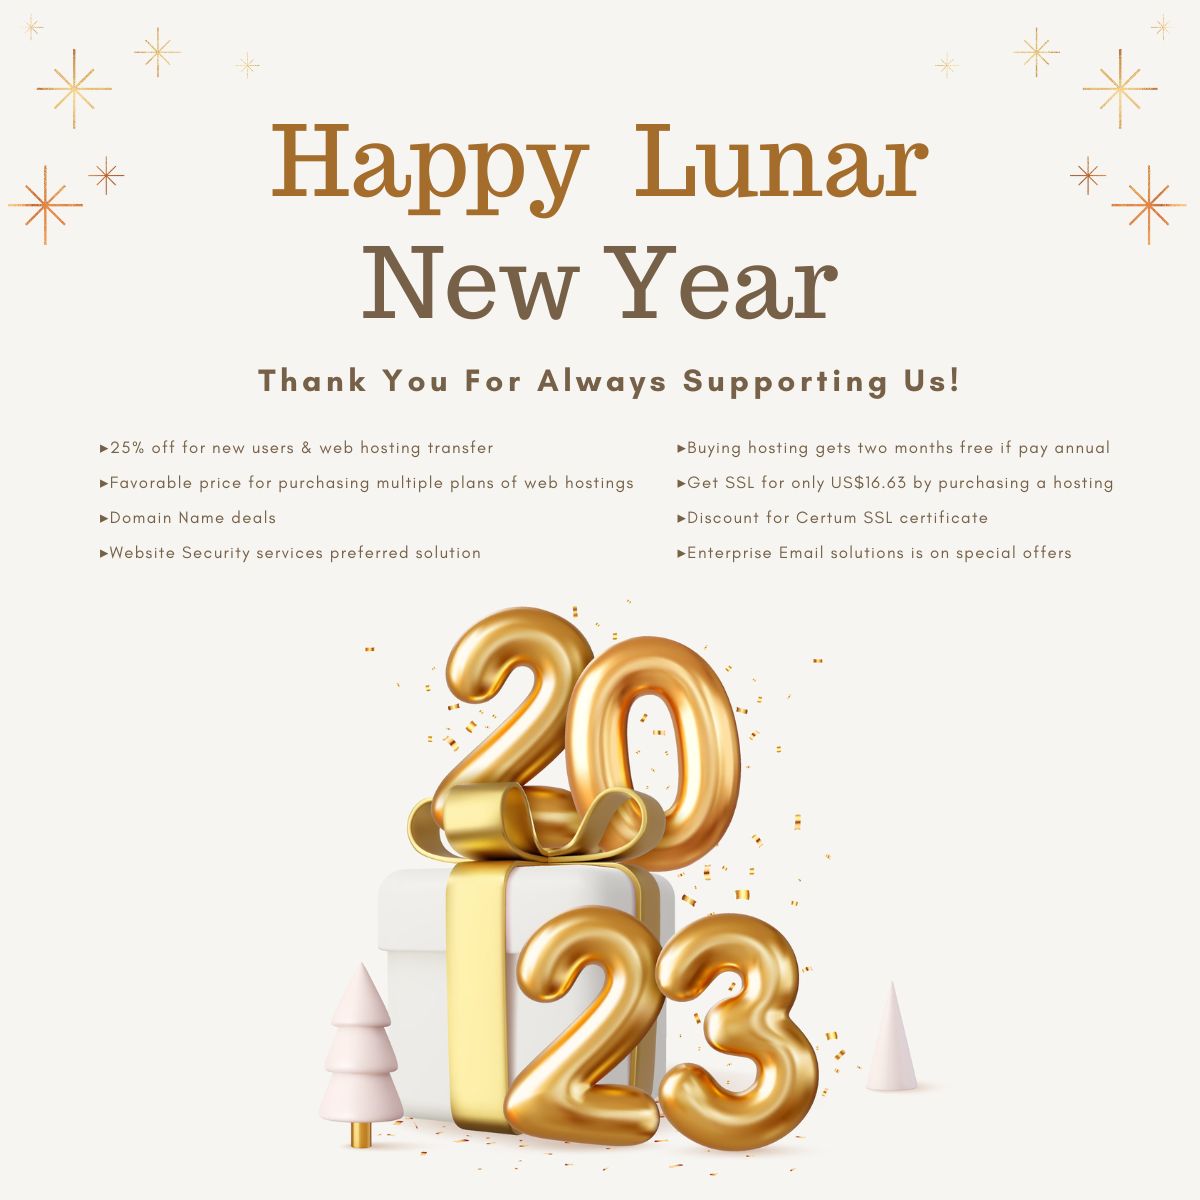 【Happy Lunar New Year】2023 Deals and discounts